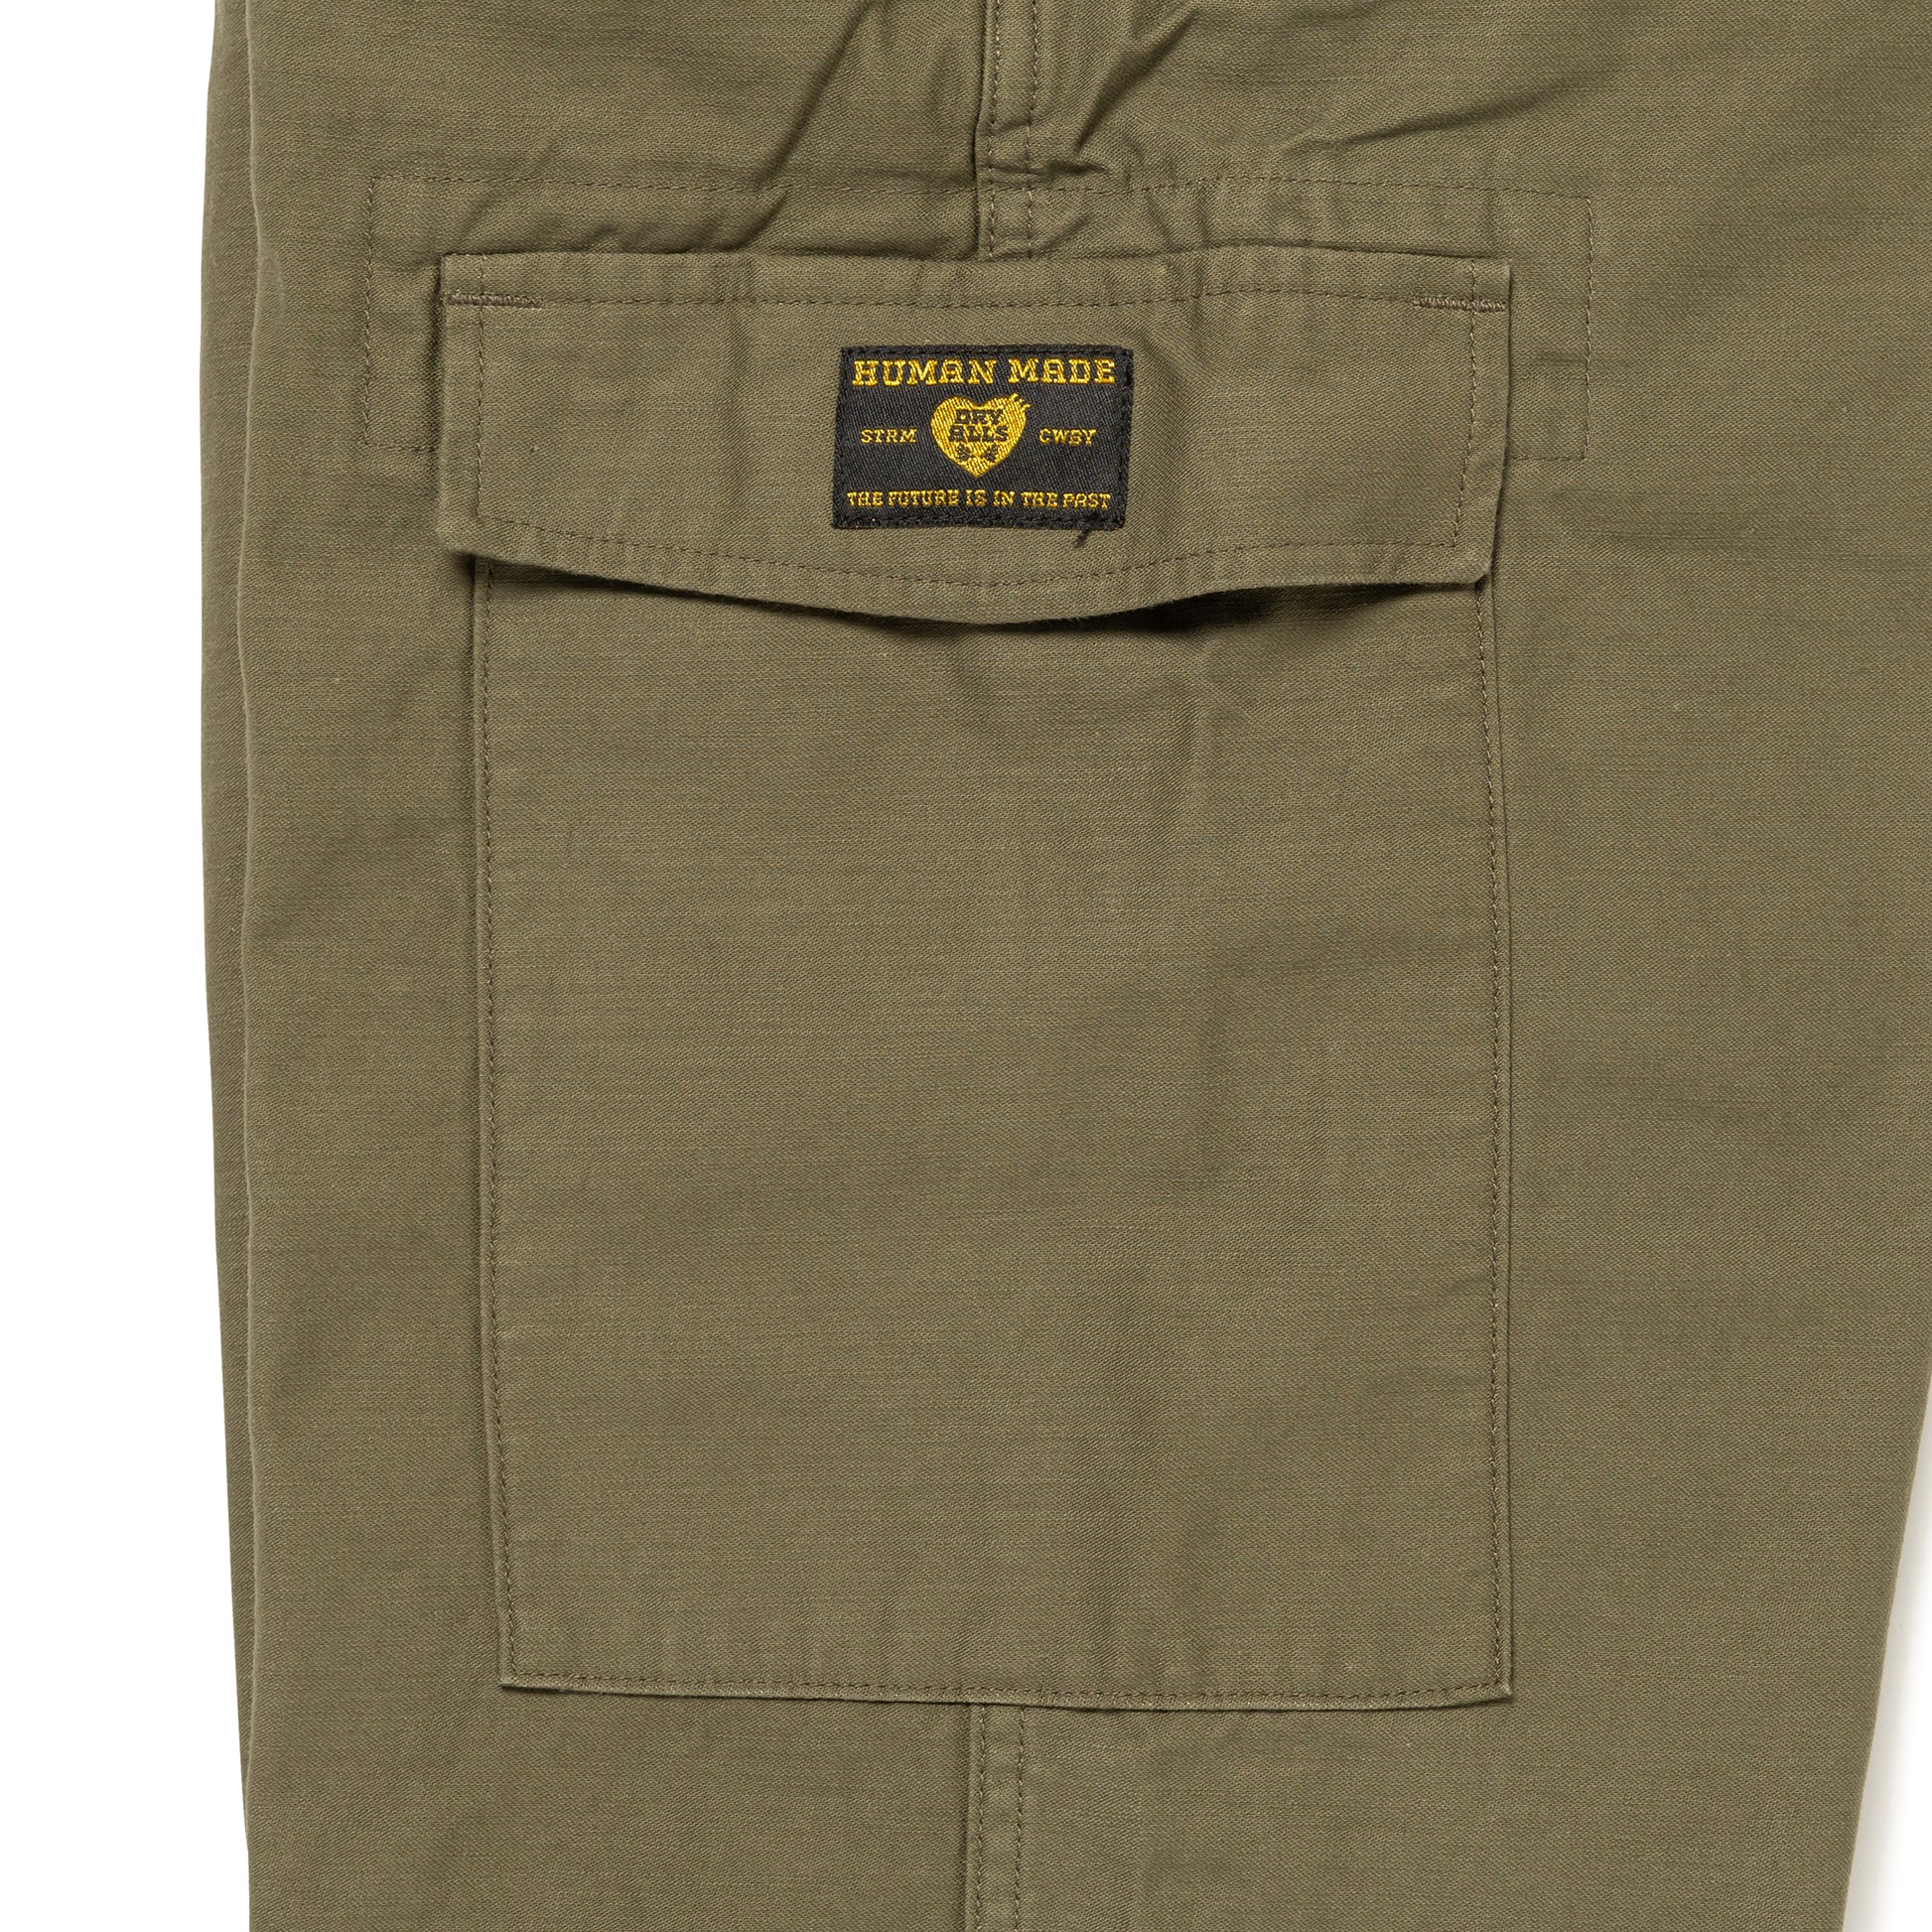 HUMAN MADE MILITARY EASY PANTS OD-D